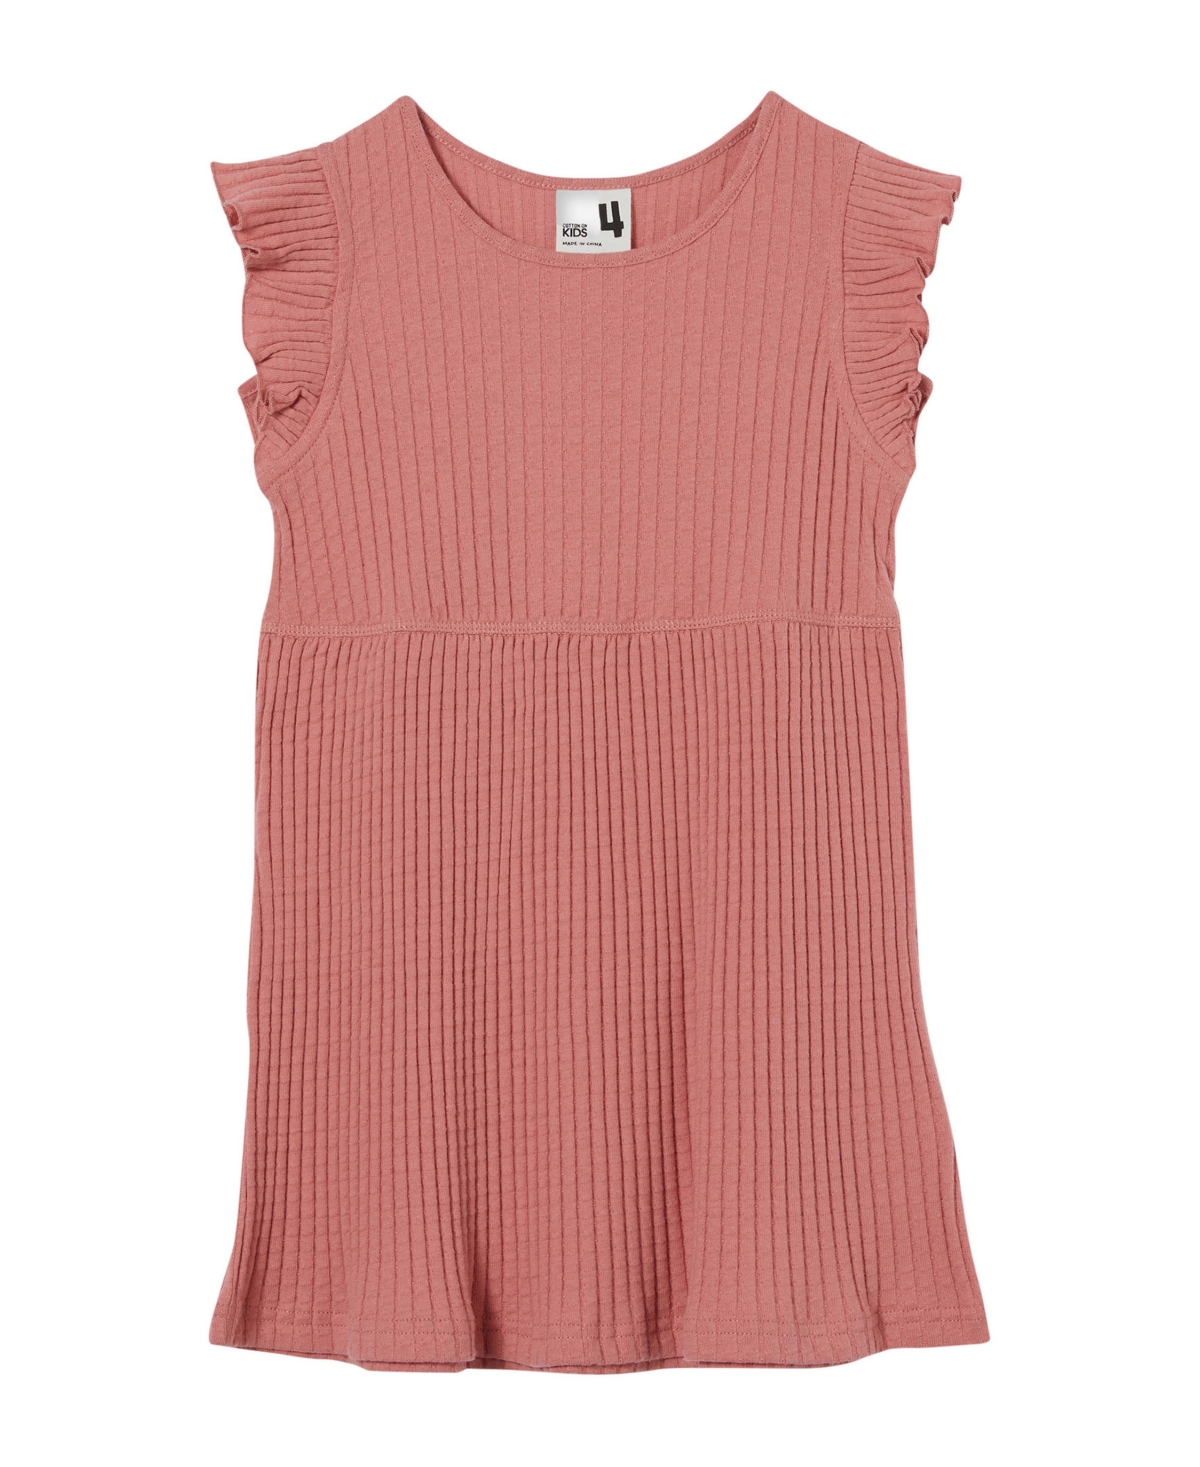 Cotton On Big Girls Ava Short Sleeve Dress In Clay Pigeon